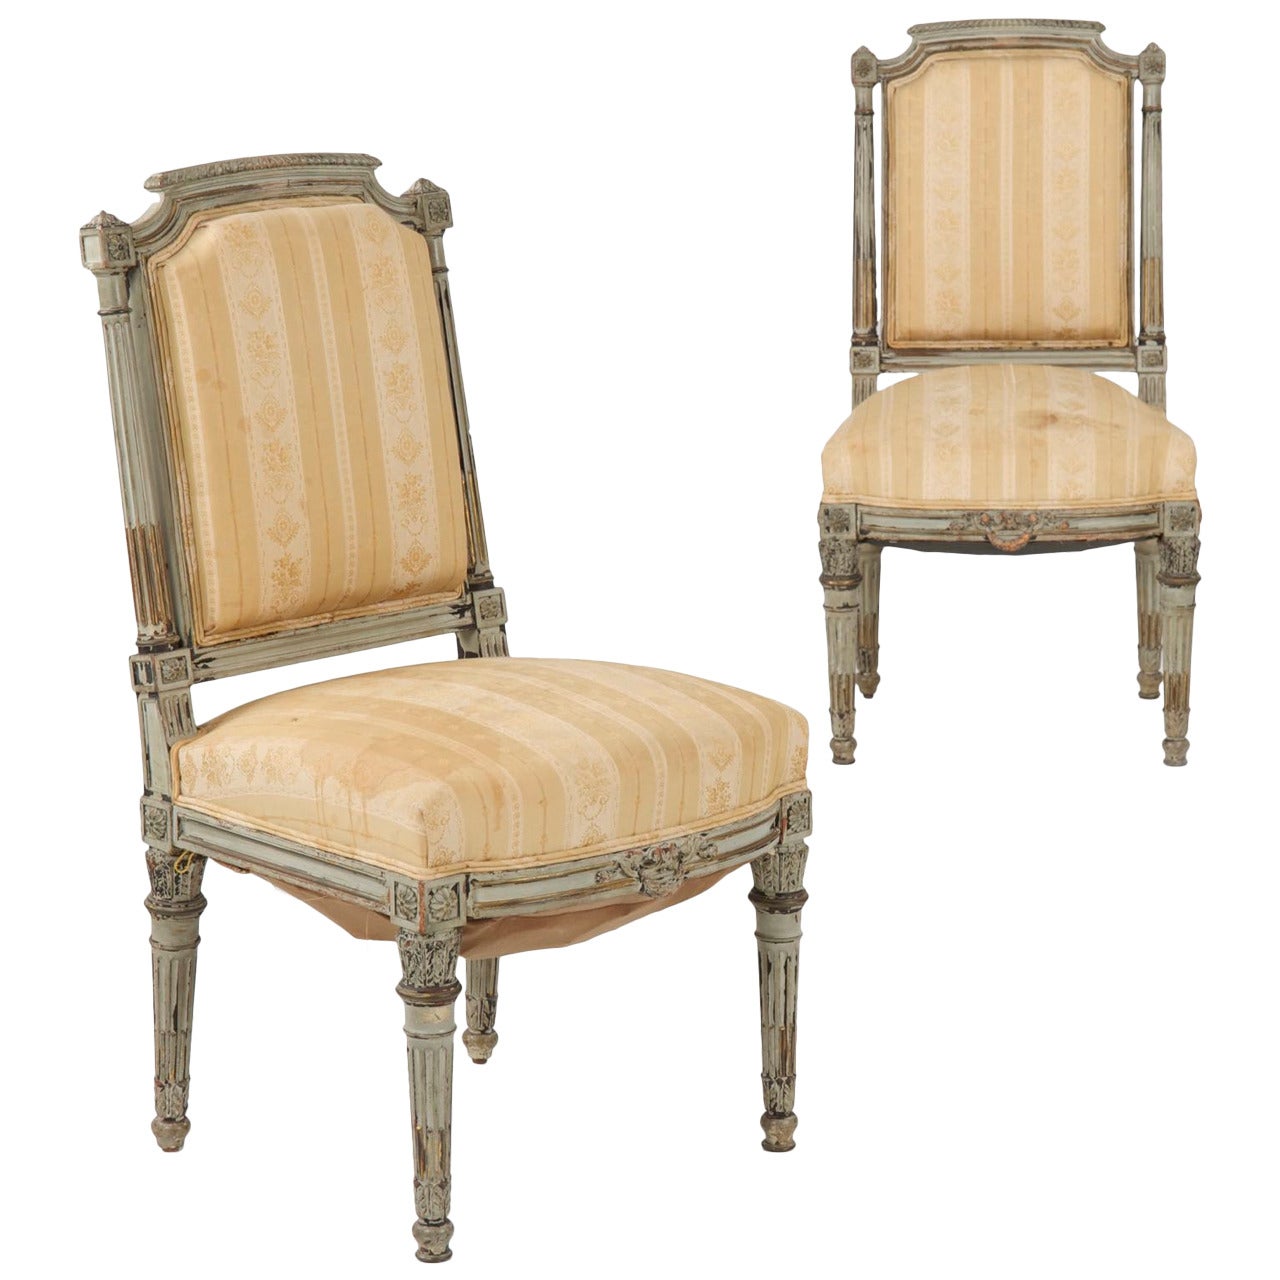 Pair of Antique French Louis XVI Style Gray Painted Side Chairs, 19th Century